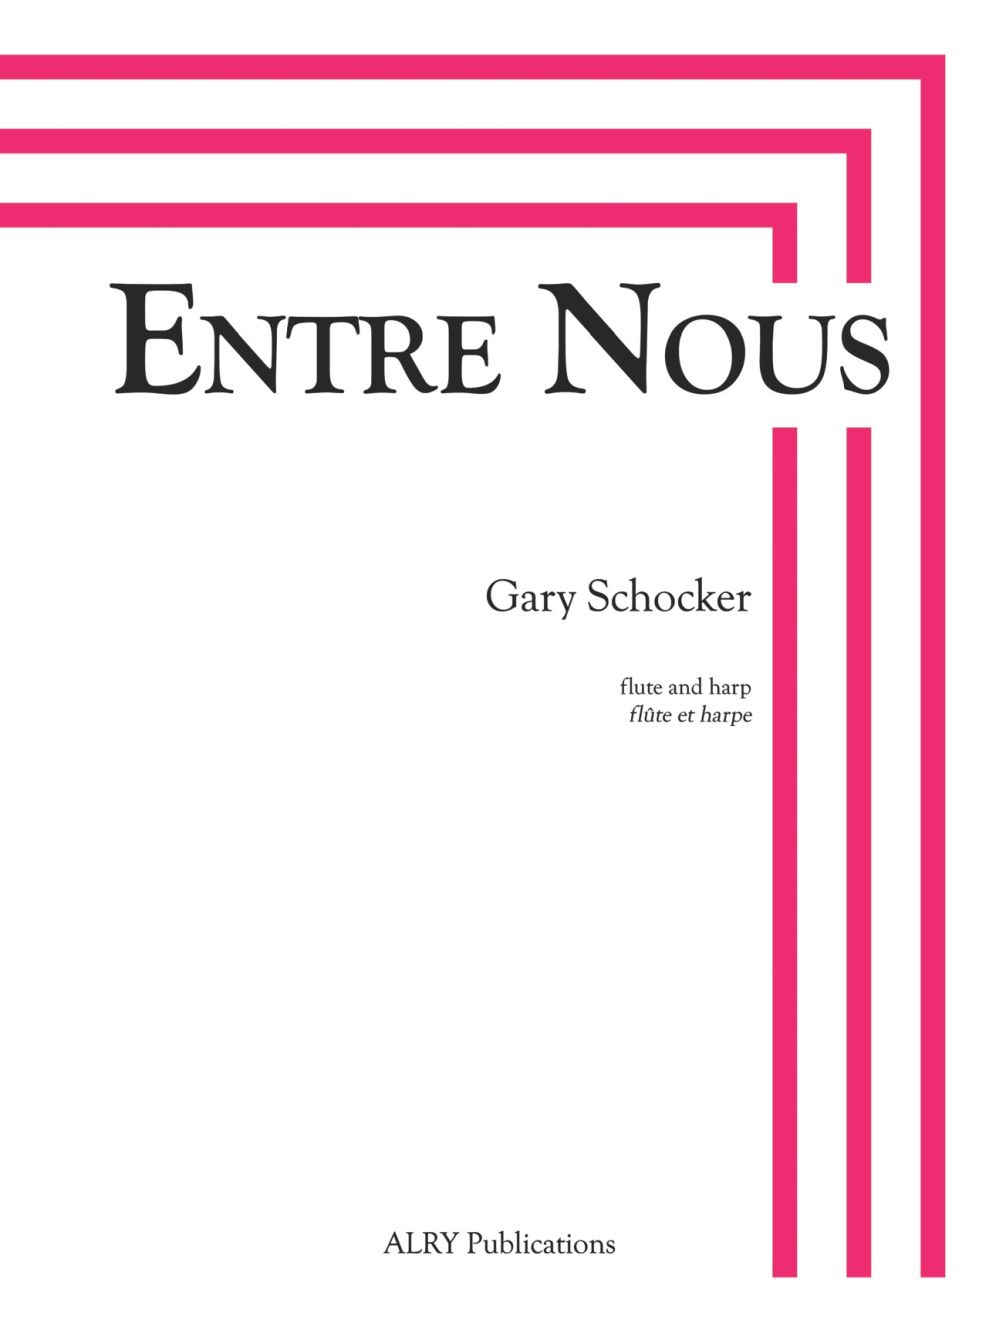 Entre Nous For Flute And Harp (SCHOCKER GARY)